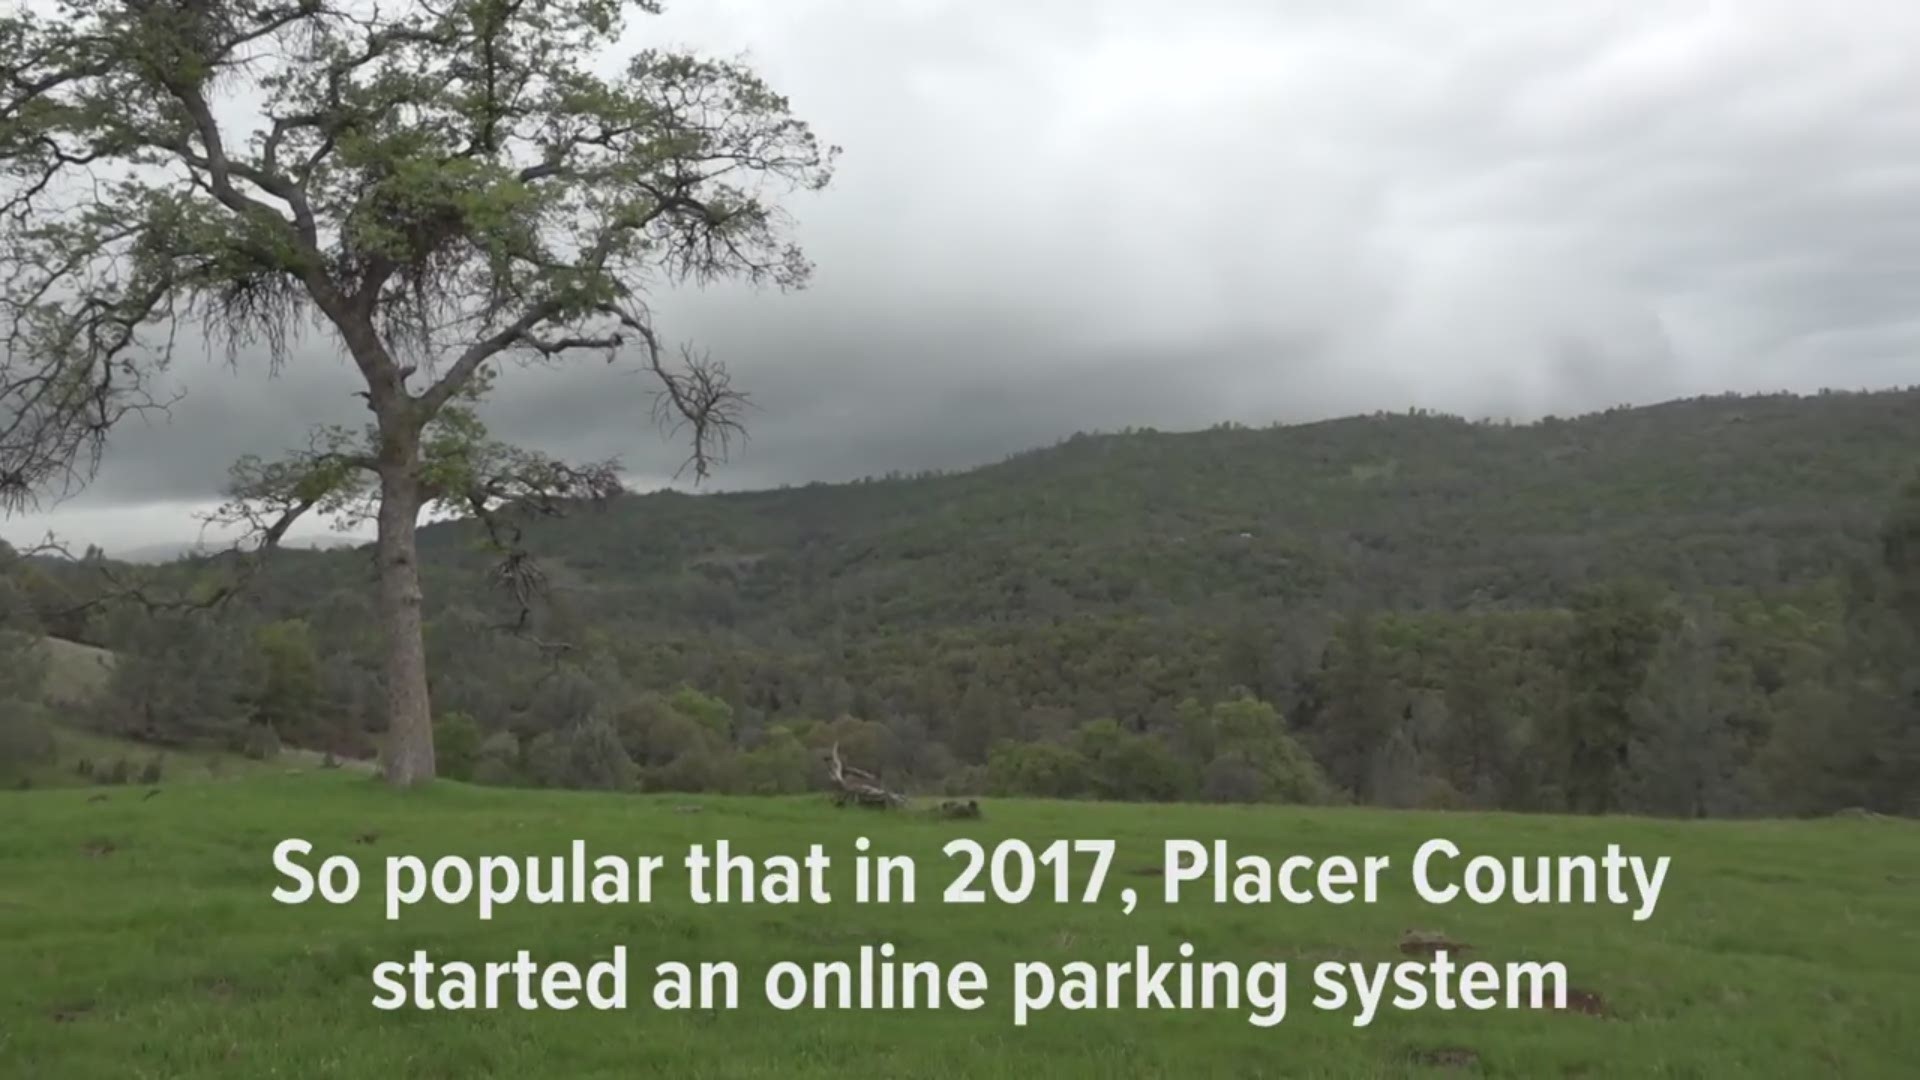 Hidden Fallens Regional Park is a destination location for people around the area. However, in response to some community frustrations over parking, Placer County created an online reservation system in 2017 to help mitigate the impacts.